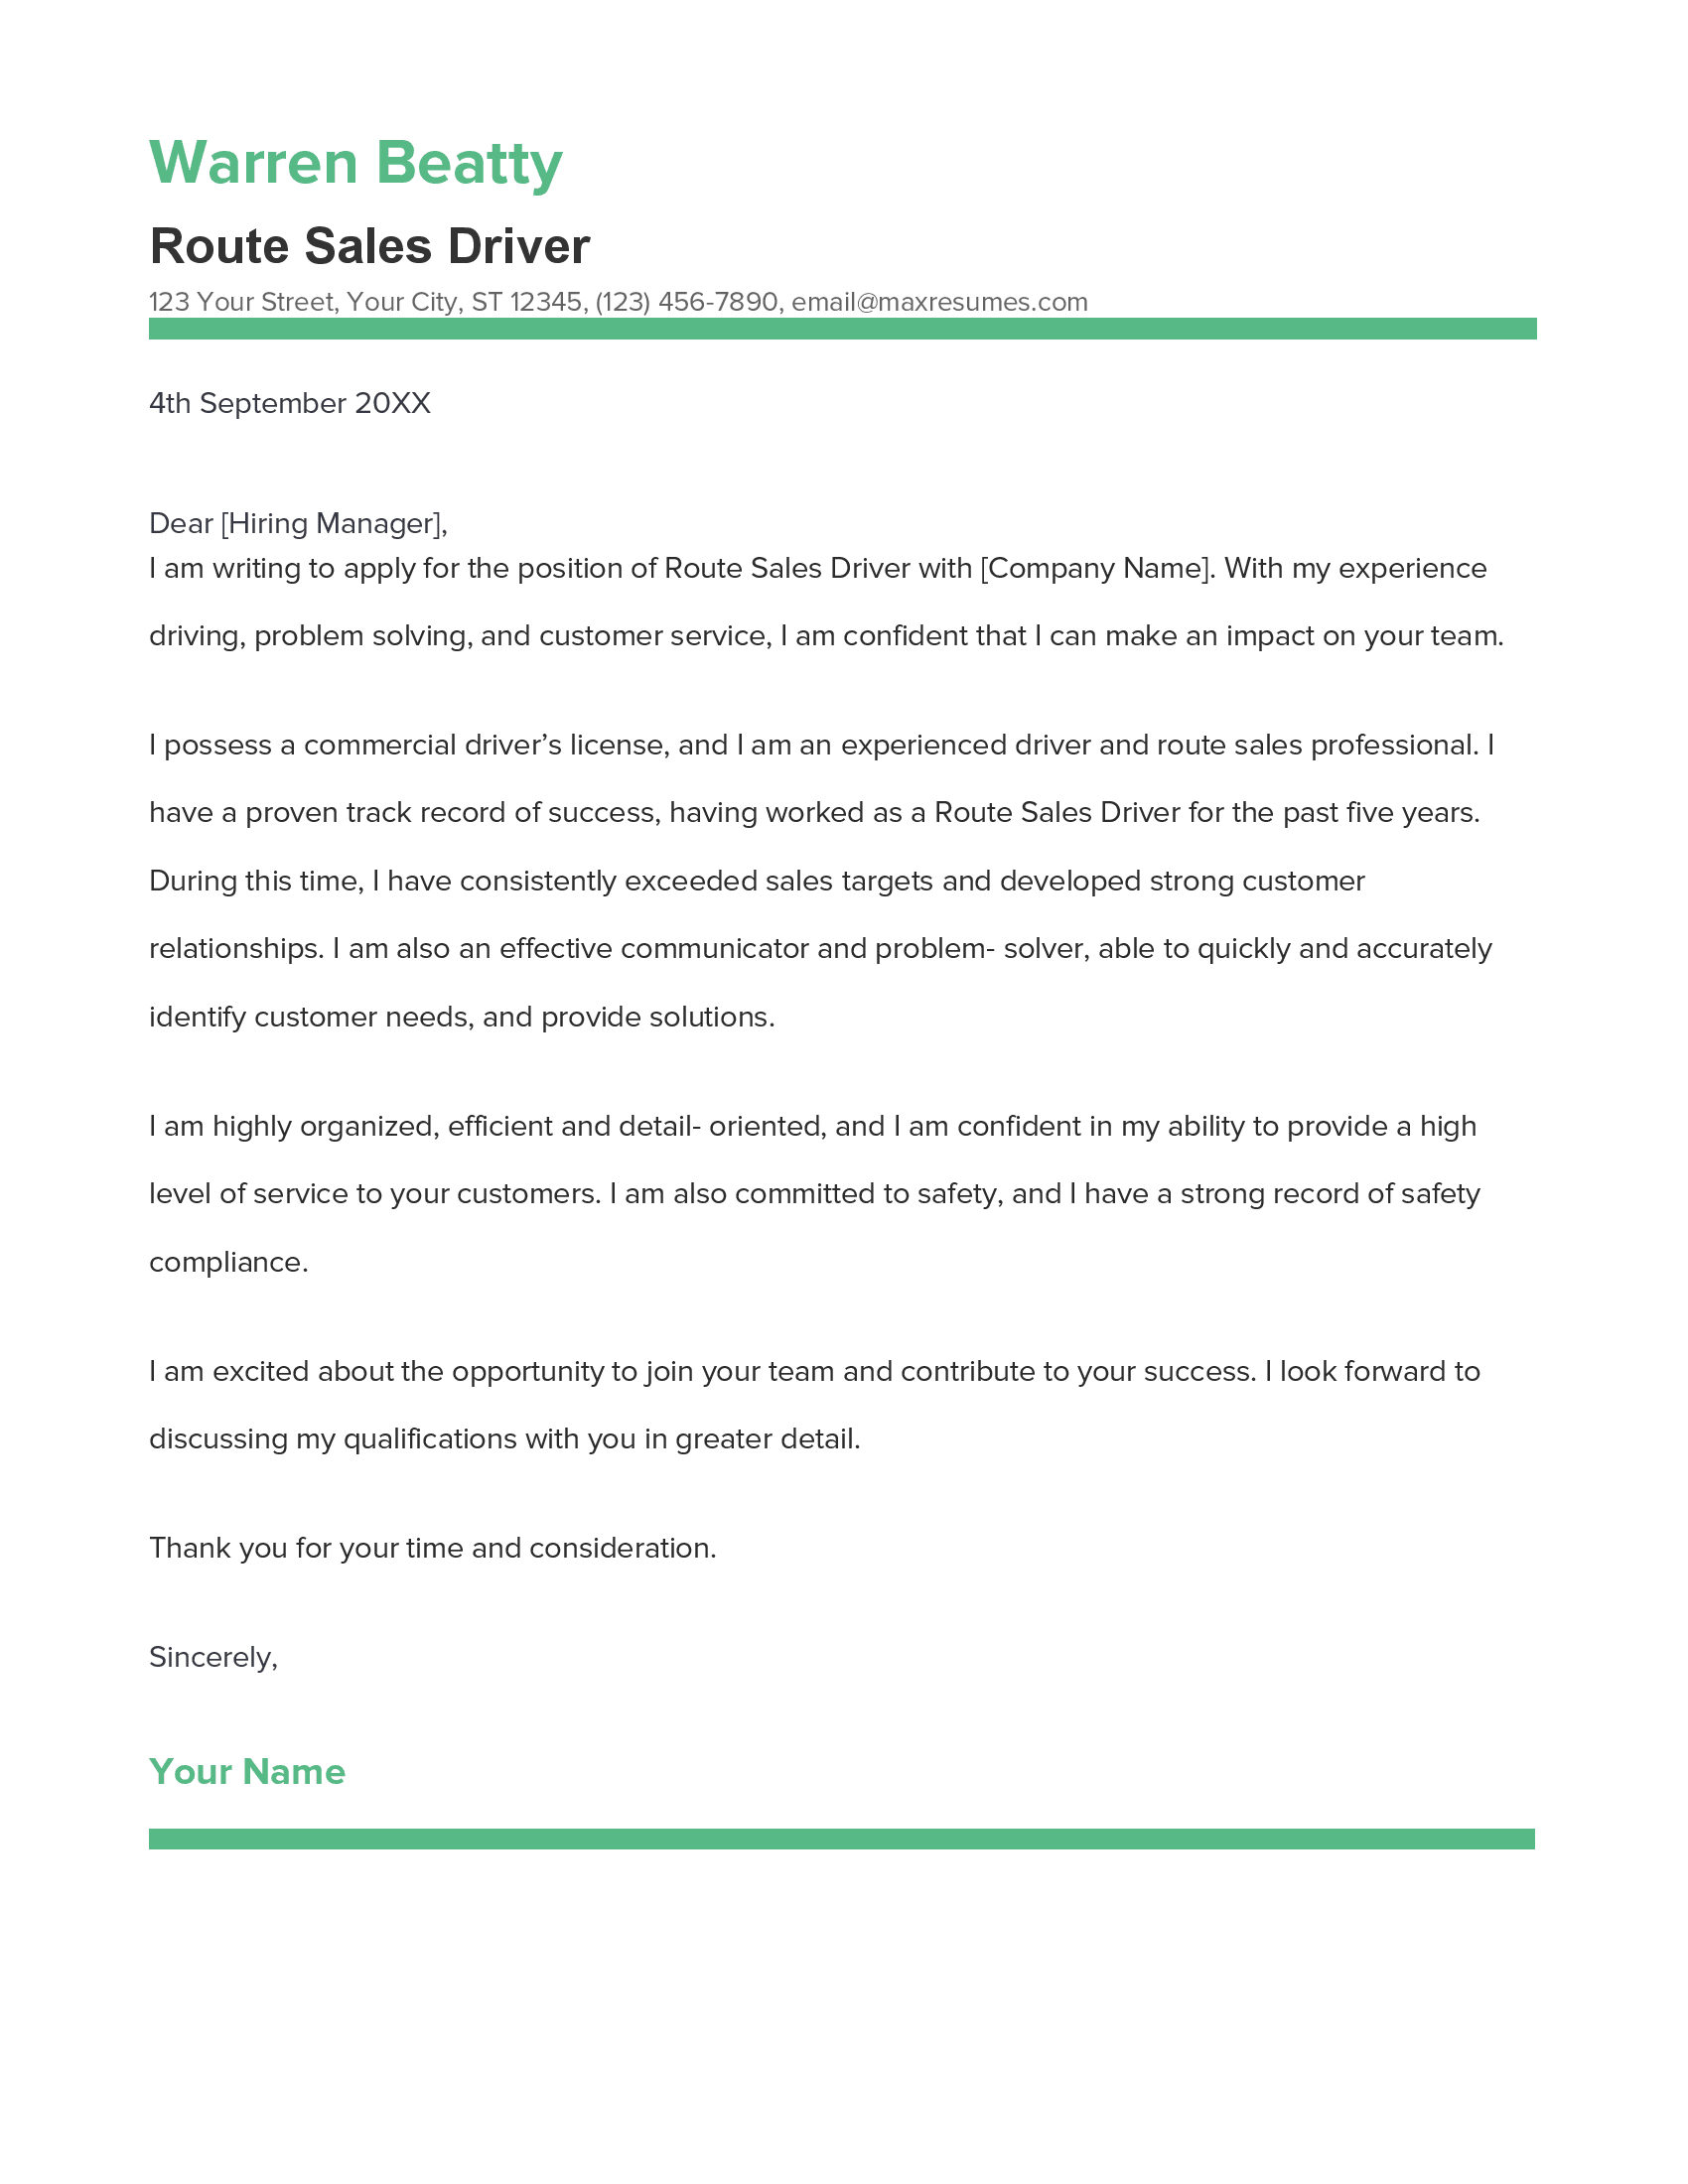 Route Sales Driver Cover Letter Example